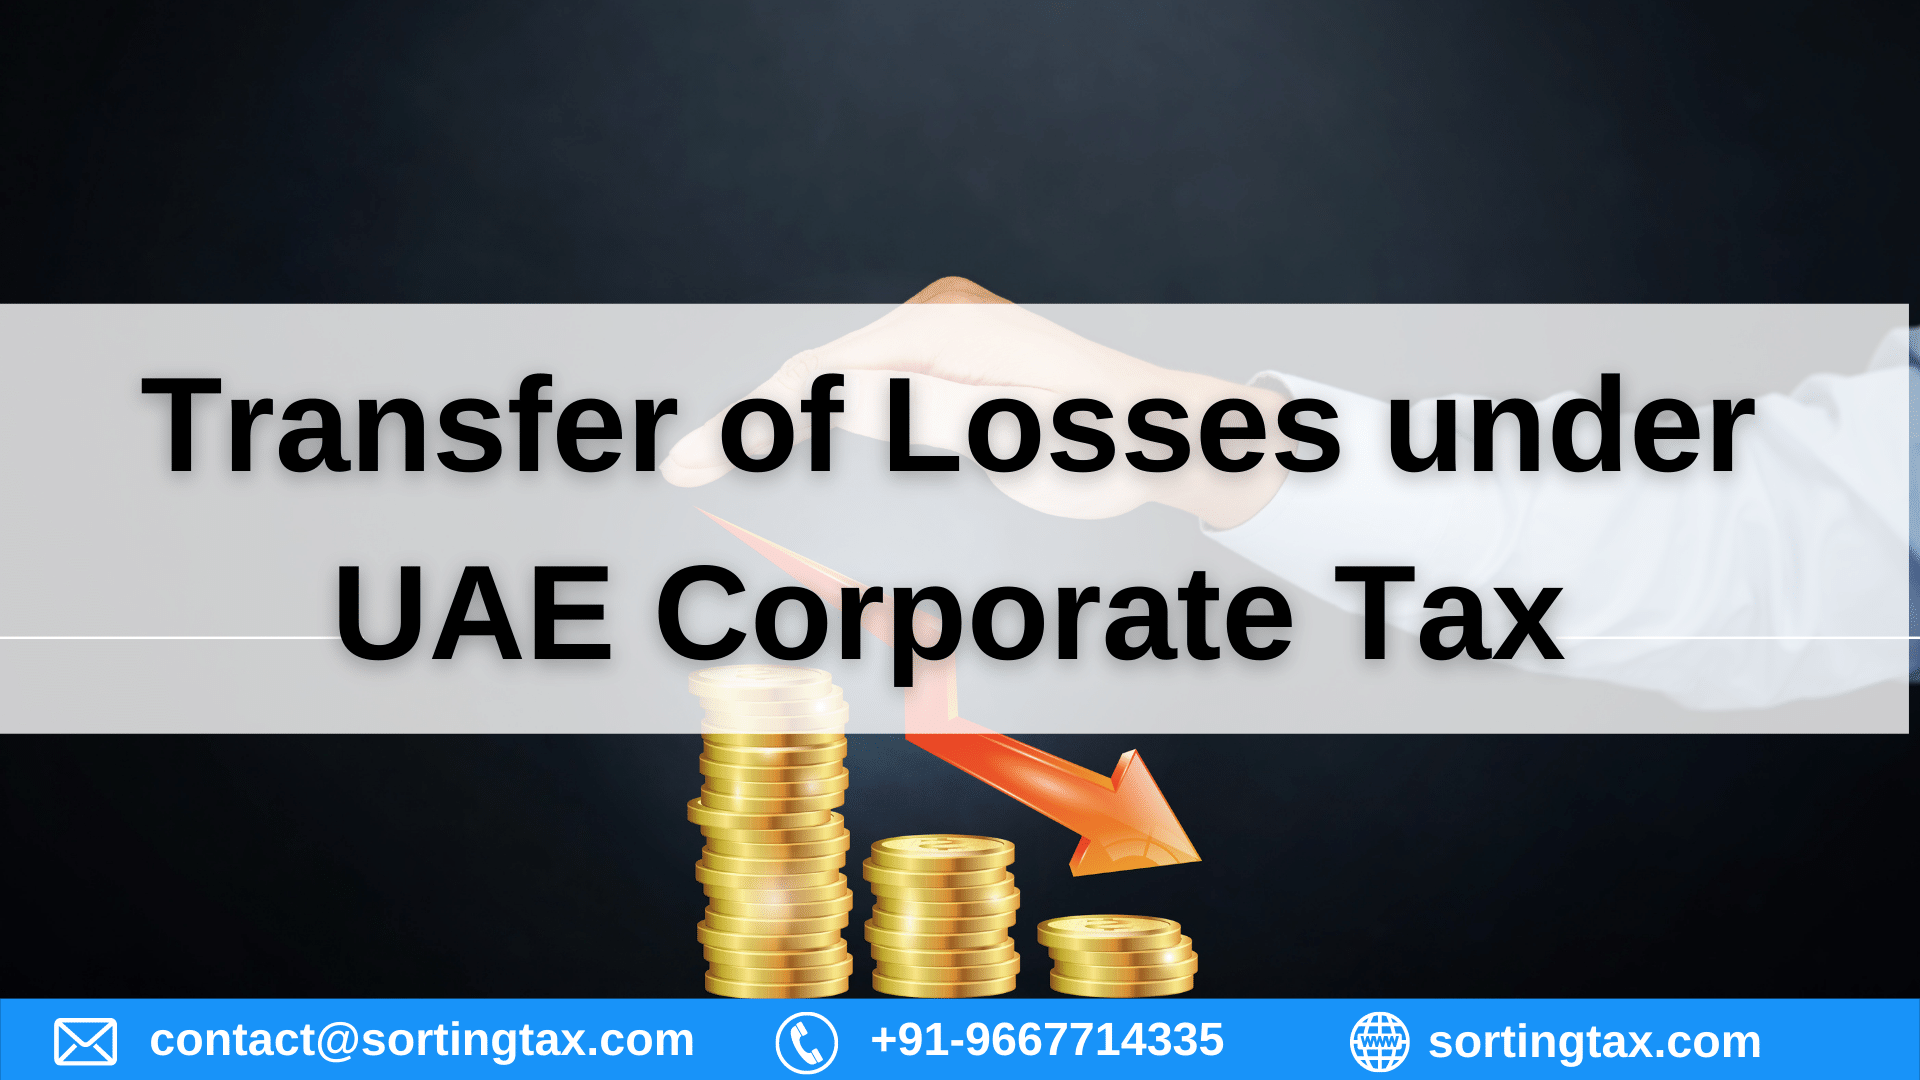 Group Transfer of Losses under UAE Corporate Tax